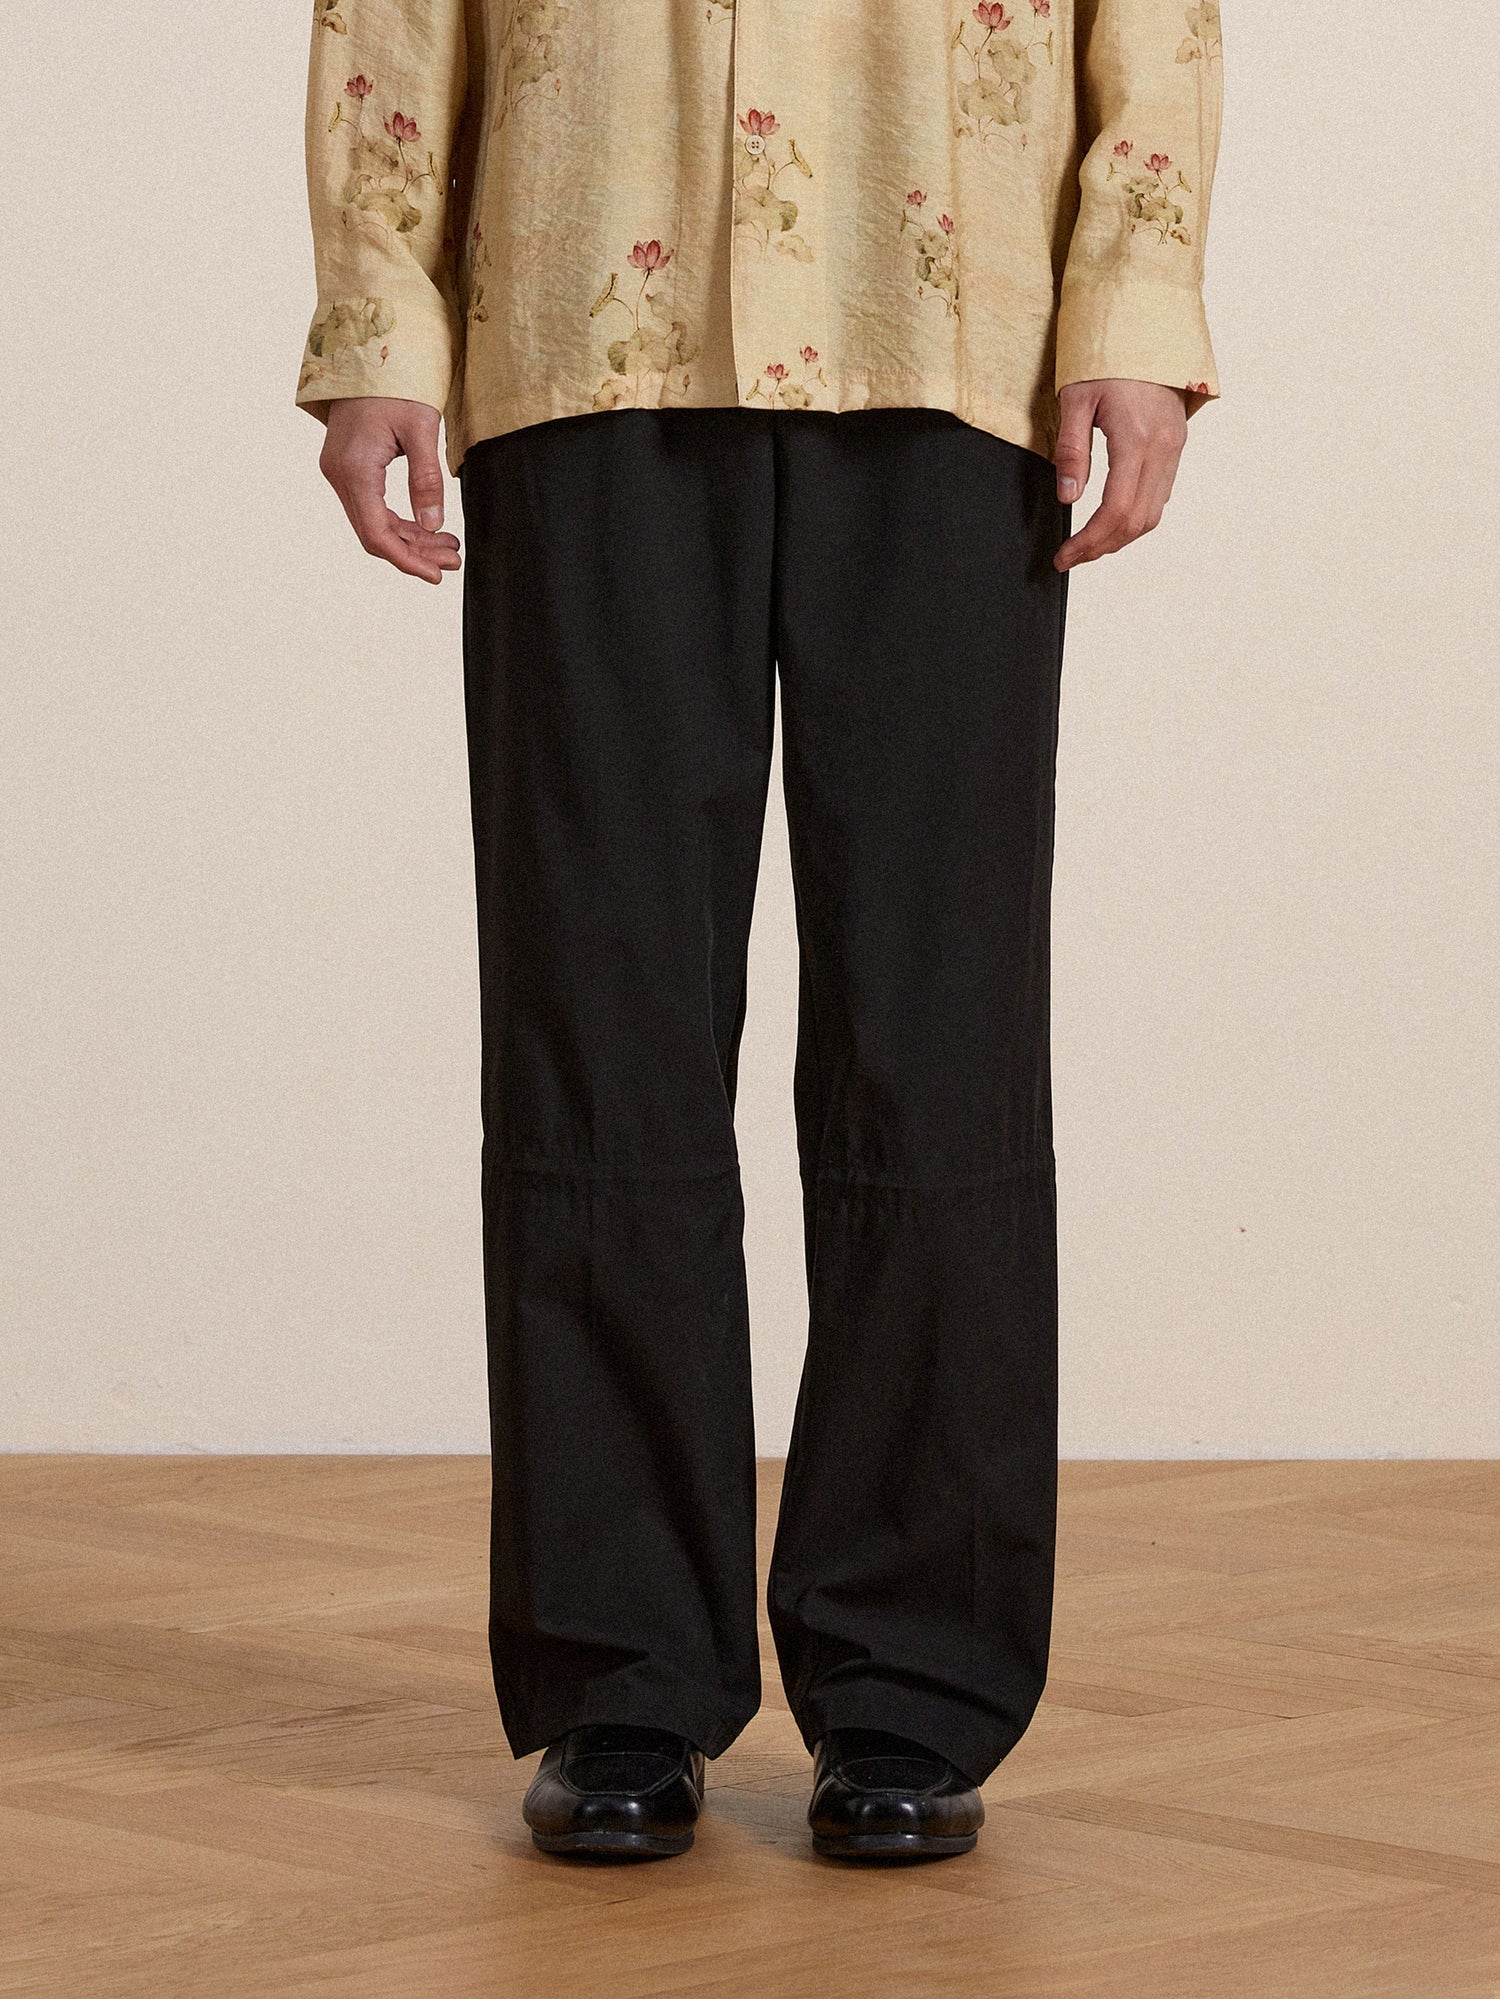 A person wearing a floral-patterned yellow shirt and black Found Tencel pleated pants, standing with hands slightly behind them, focusing on the lower half of the body.